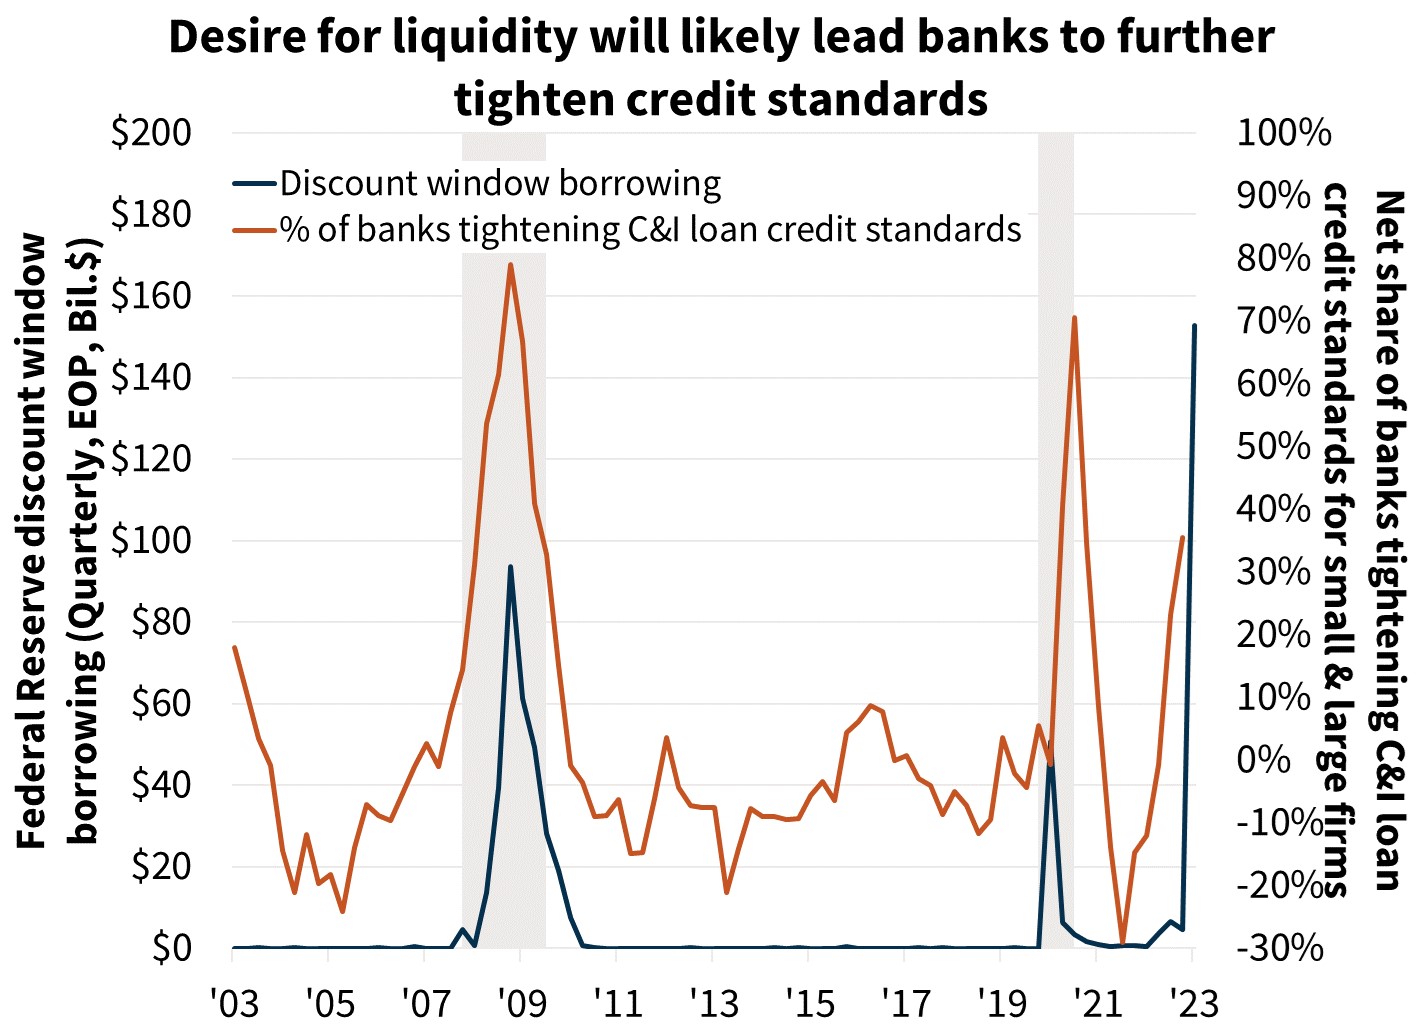  Desire for liquidity will likely lead banks to further tighten credit standards 